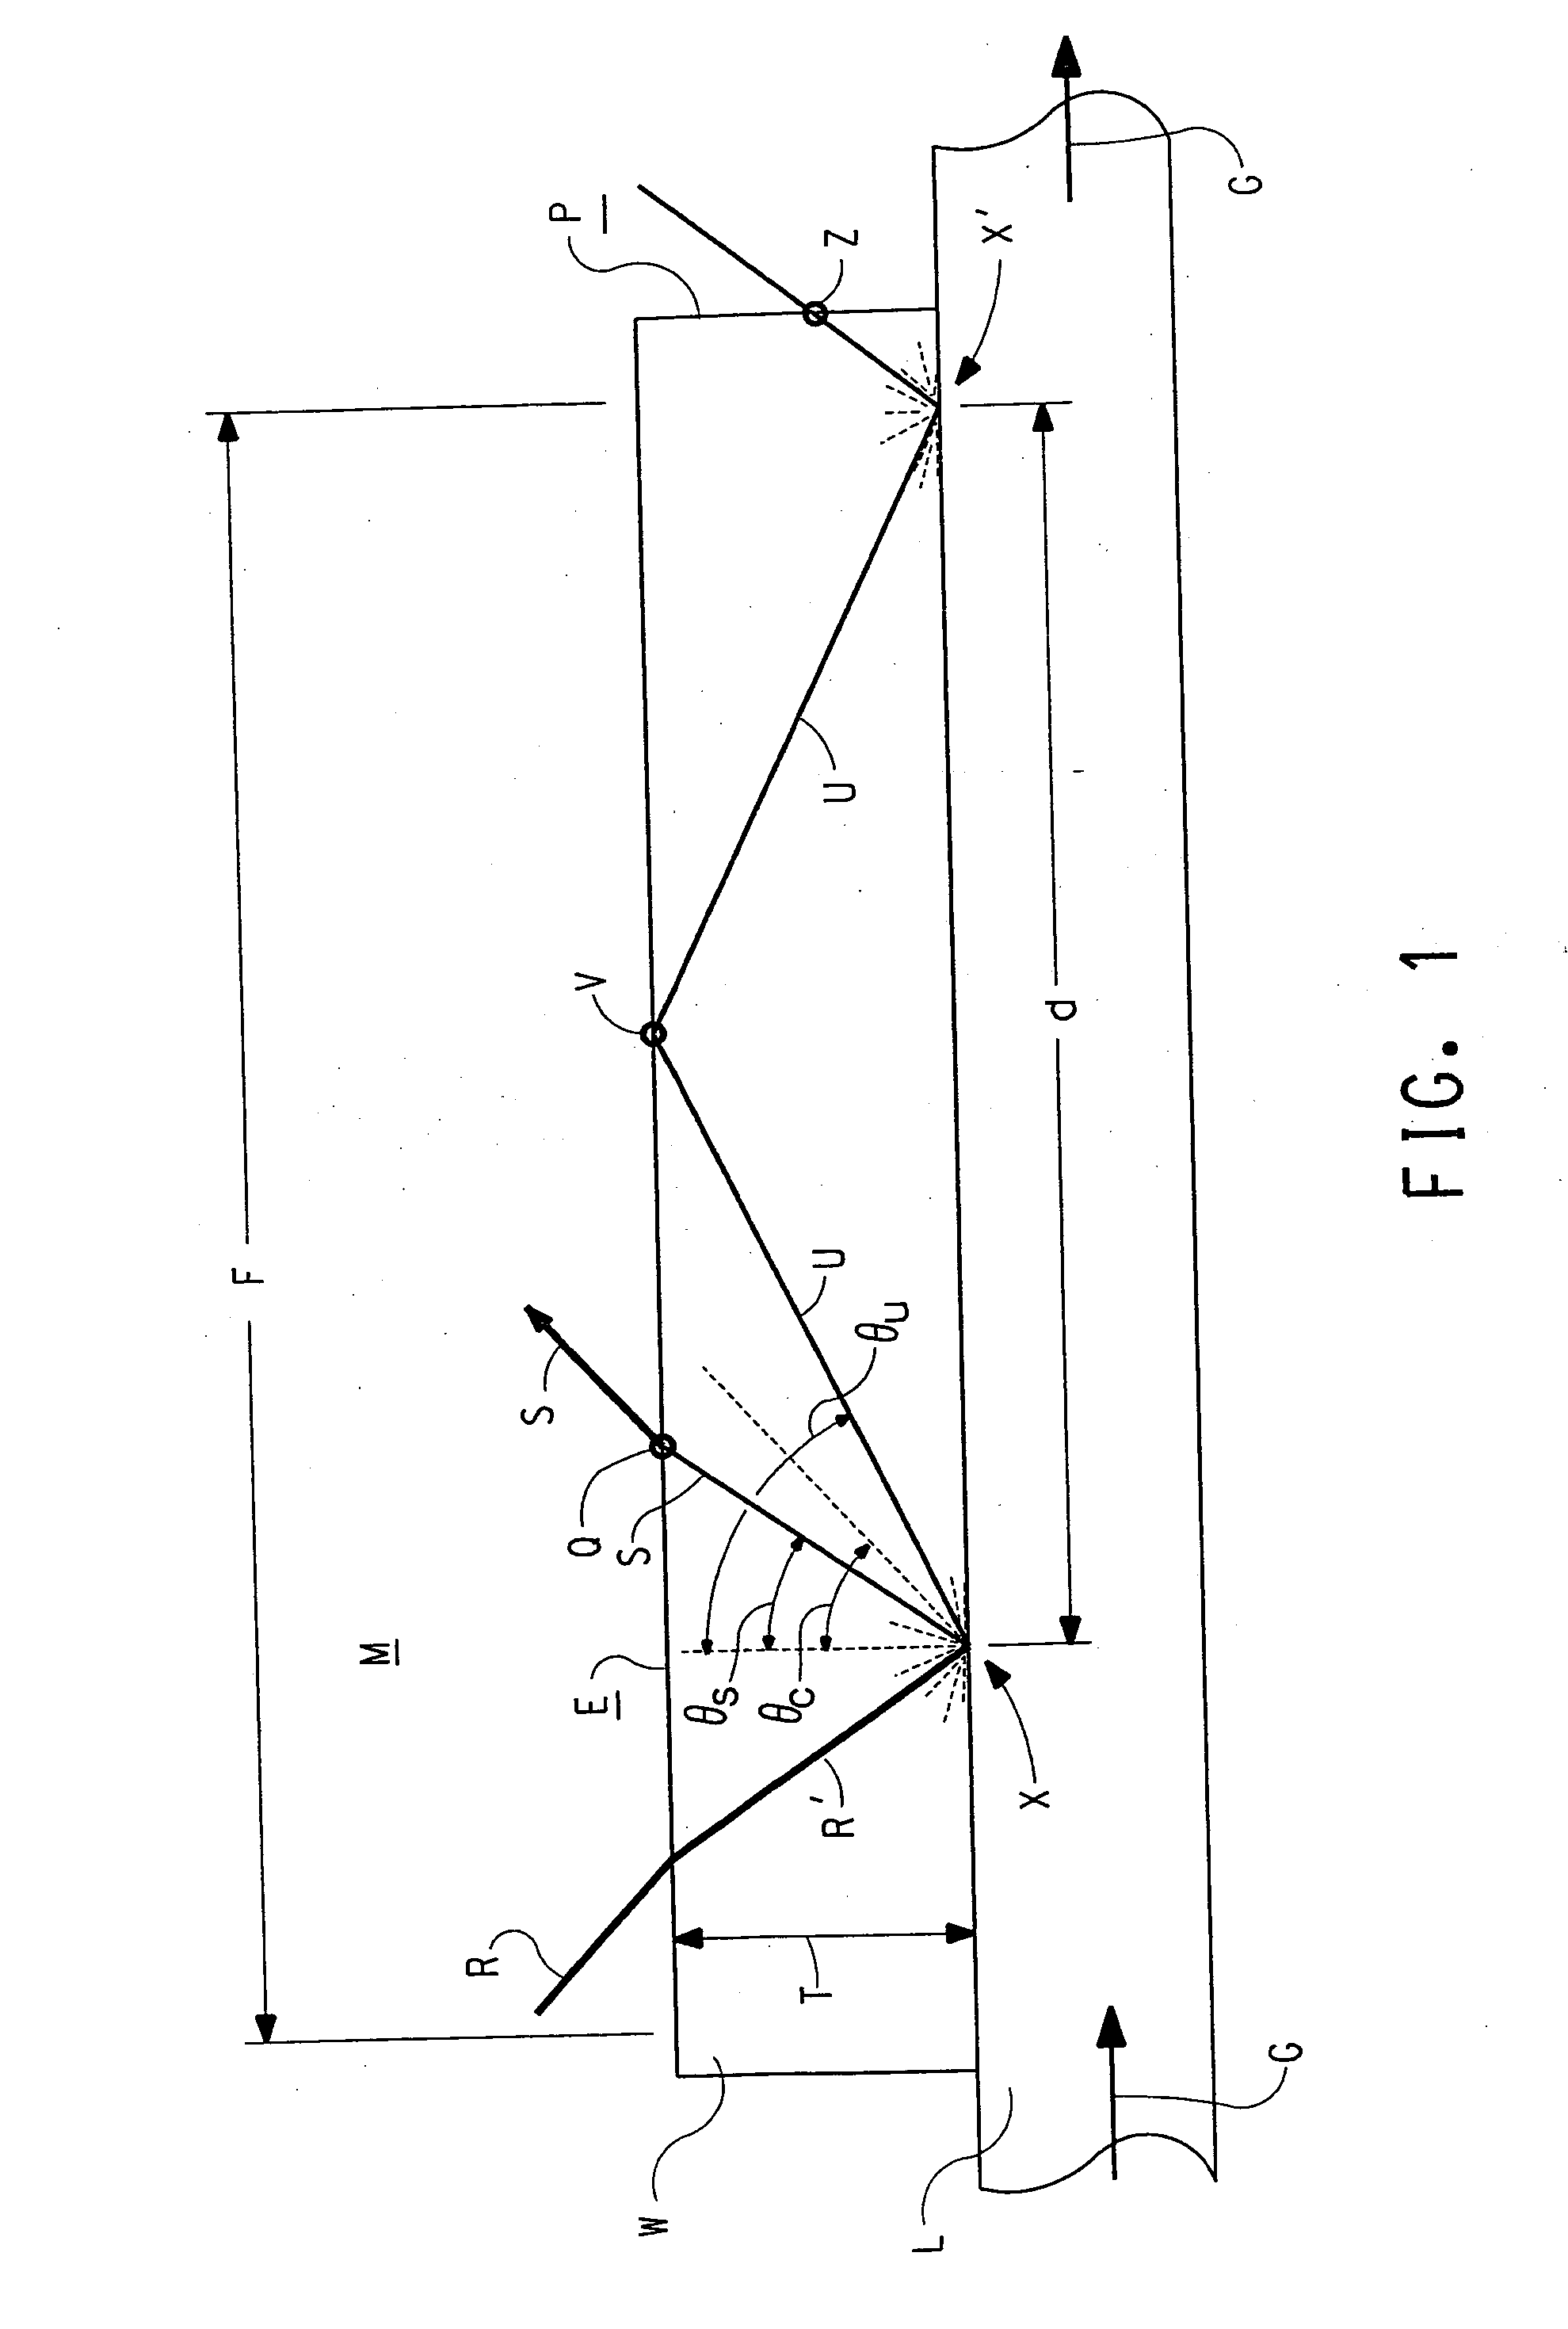 Liquid measurement cell having a pressurized air cavity therein